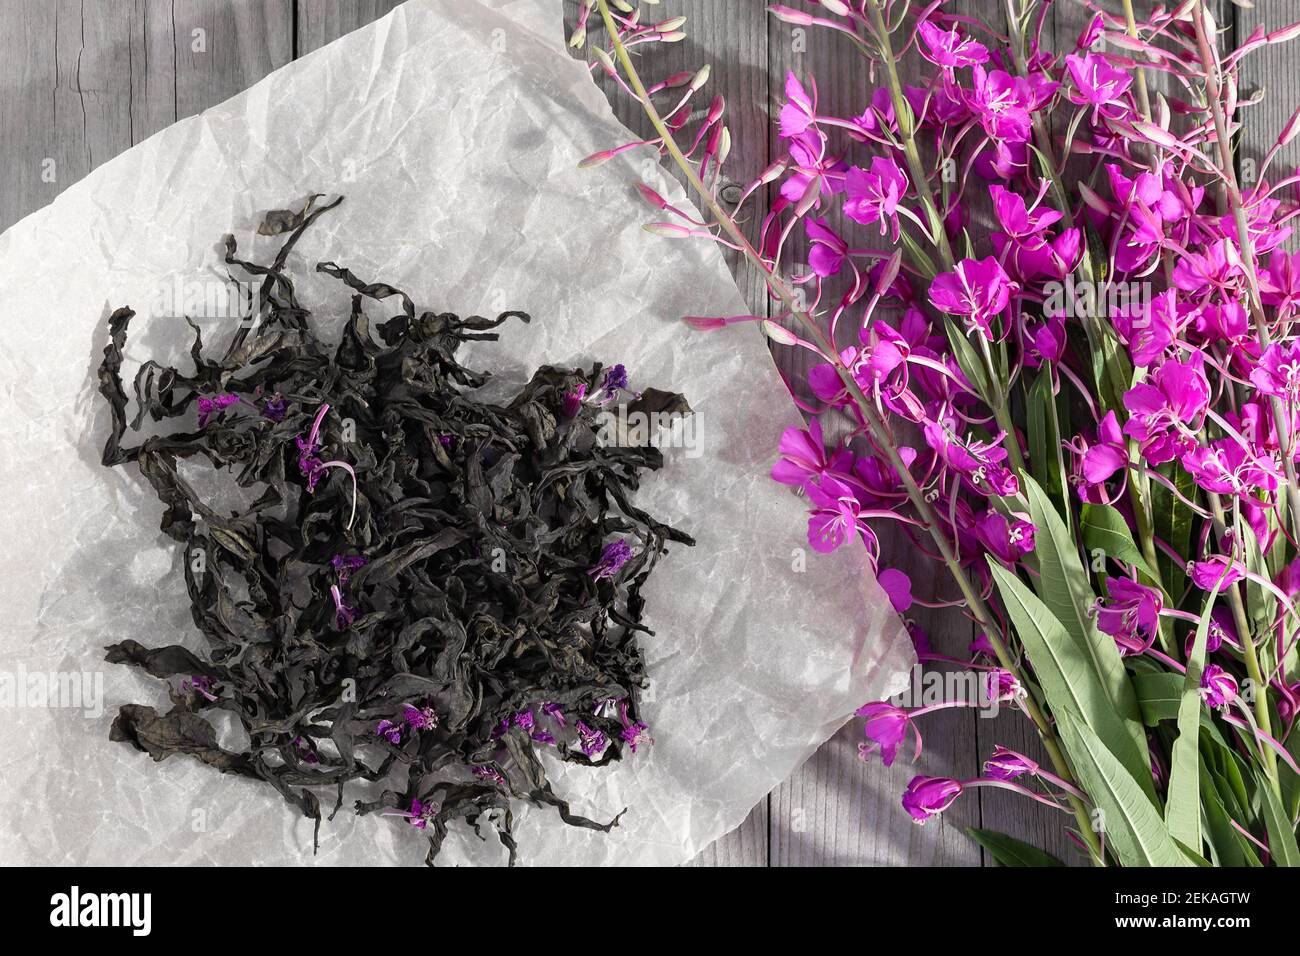 Herb is fireweed known as blooming sally and fermented dry tea. Stock Photo